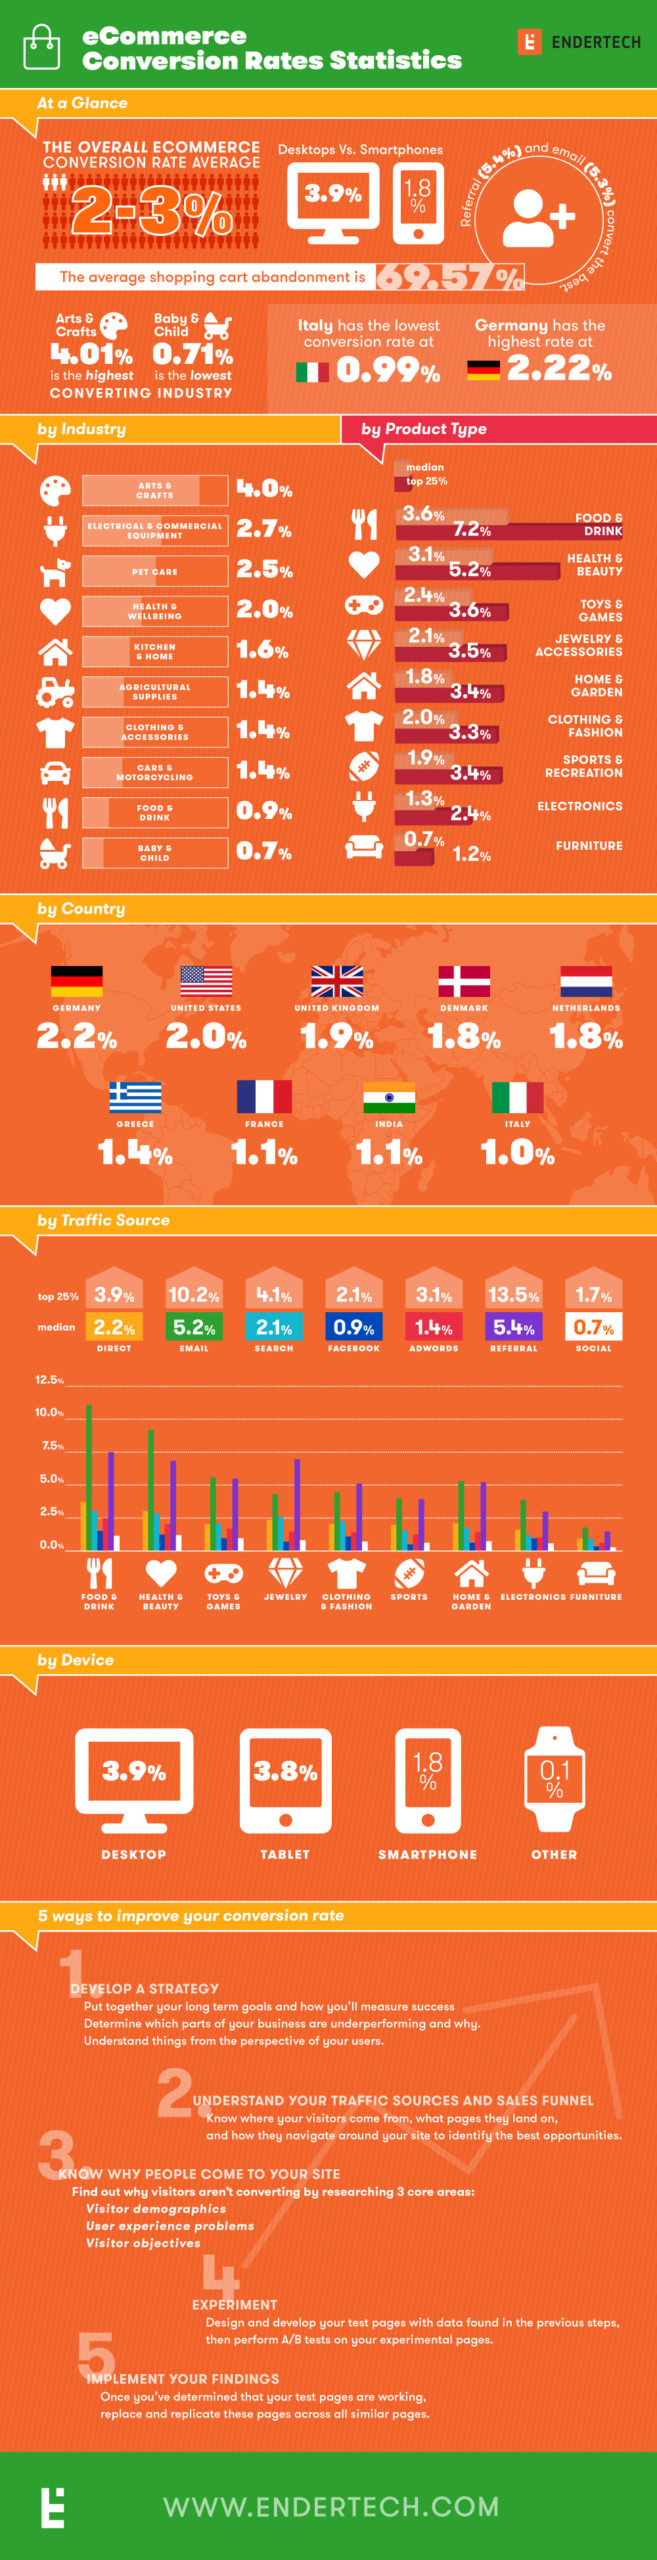 Ecommerce Conversion Rates Infographic